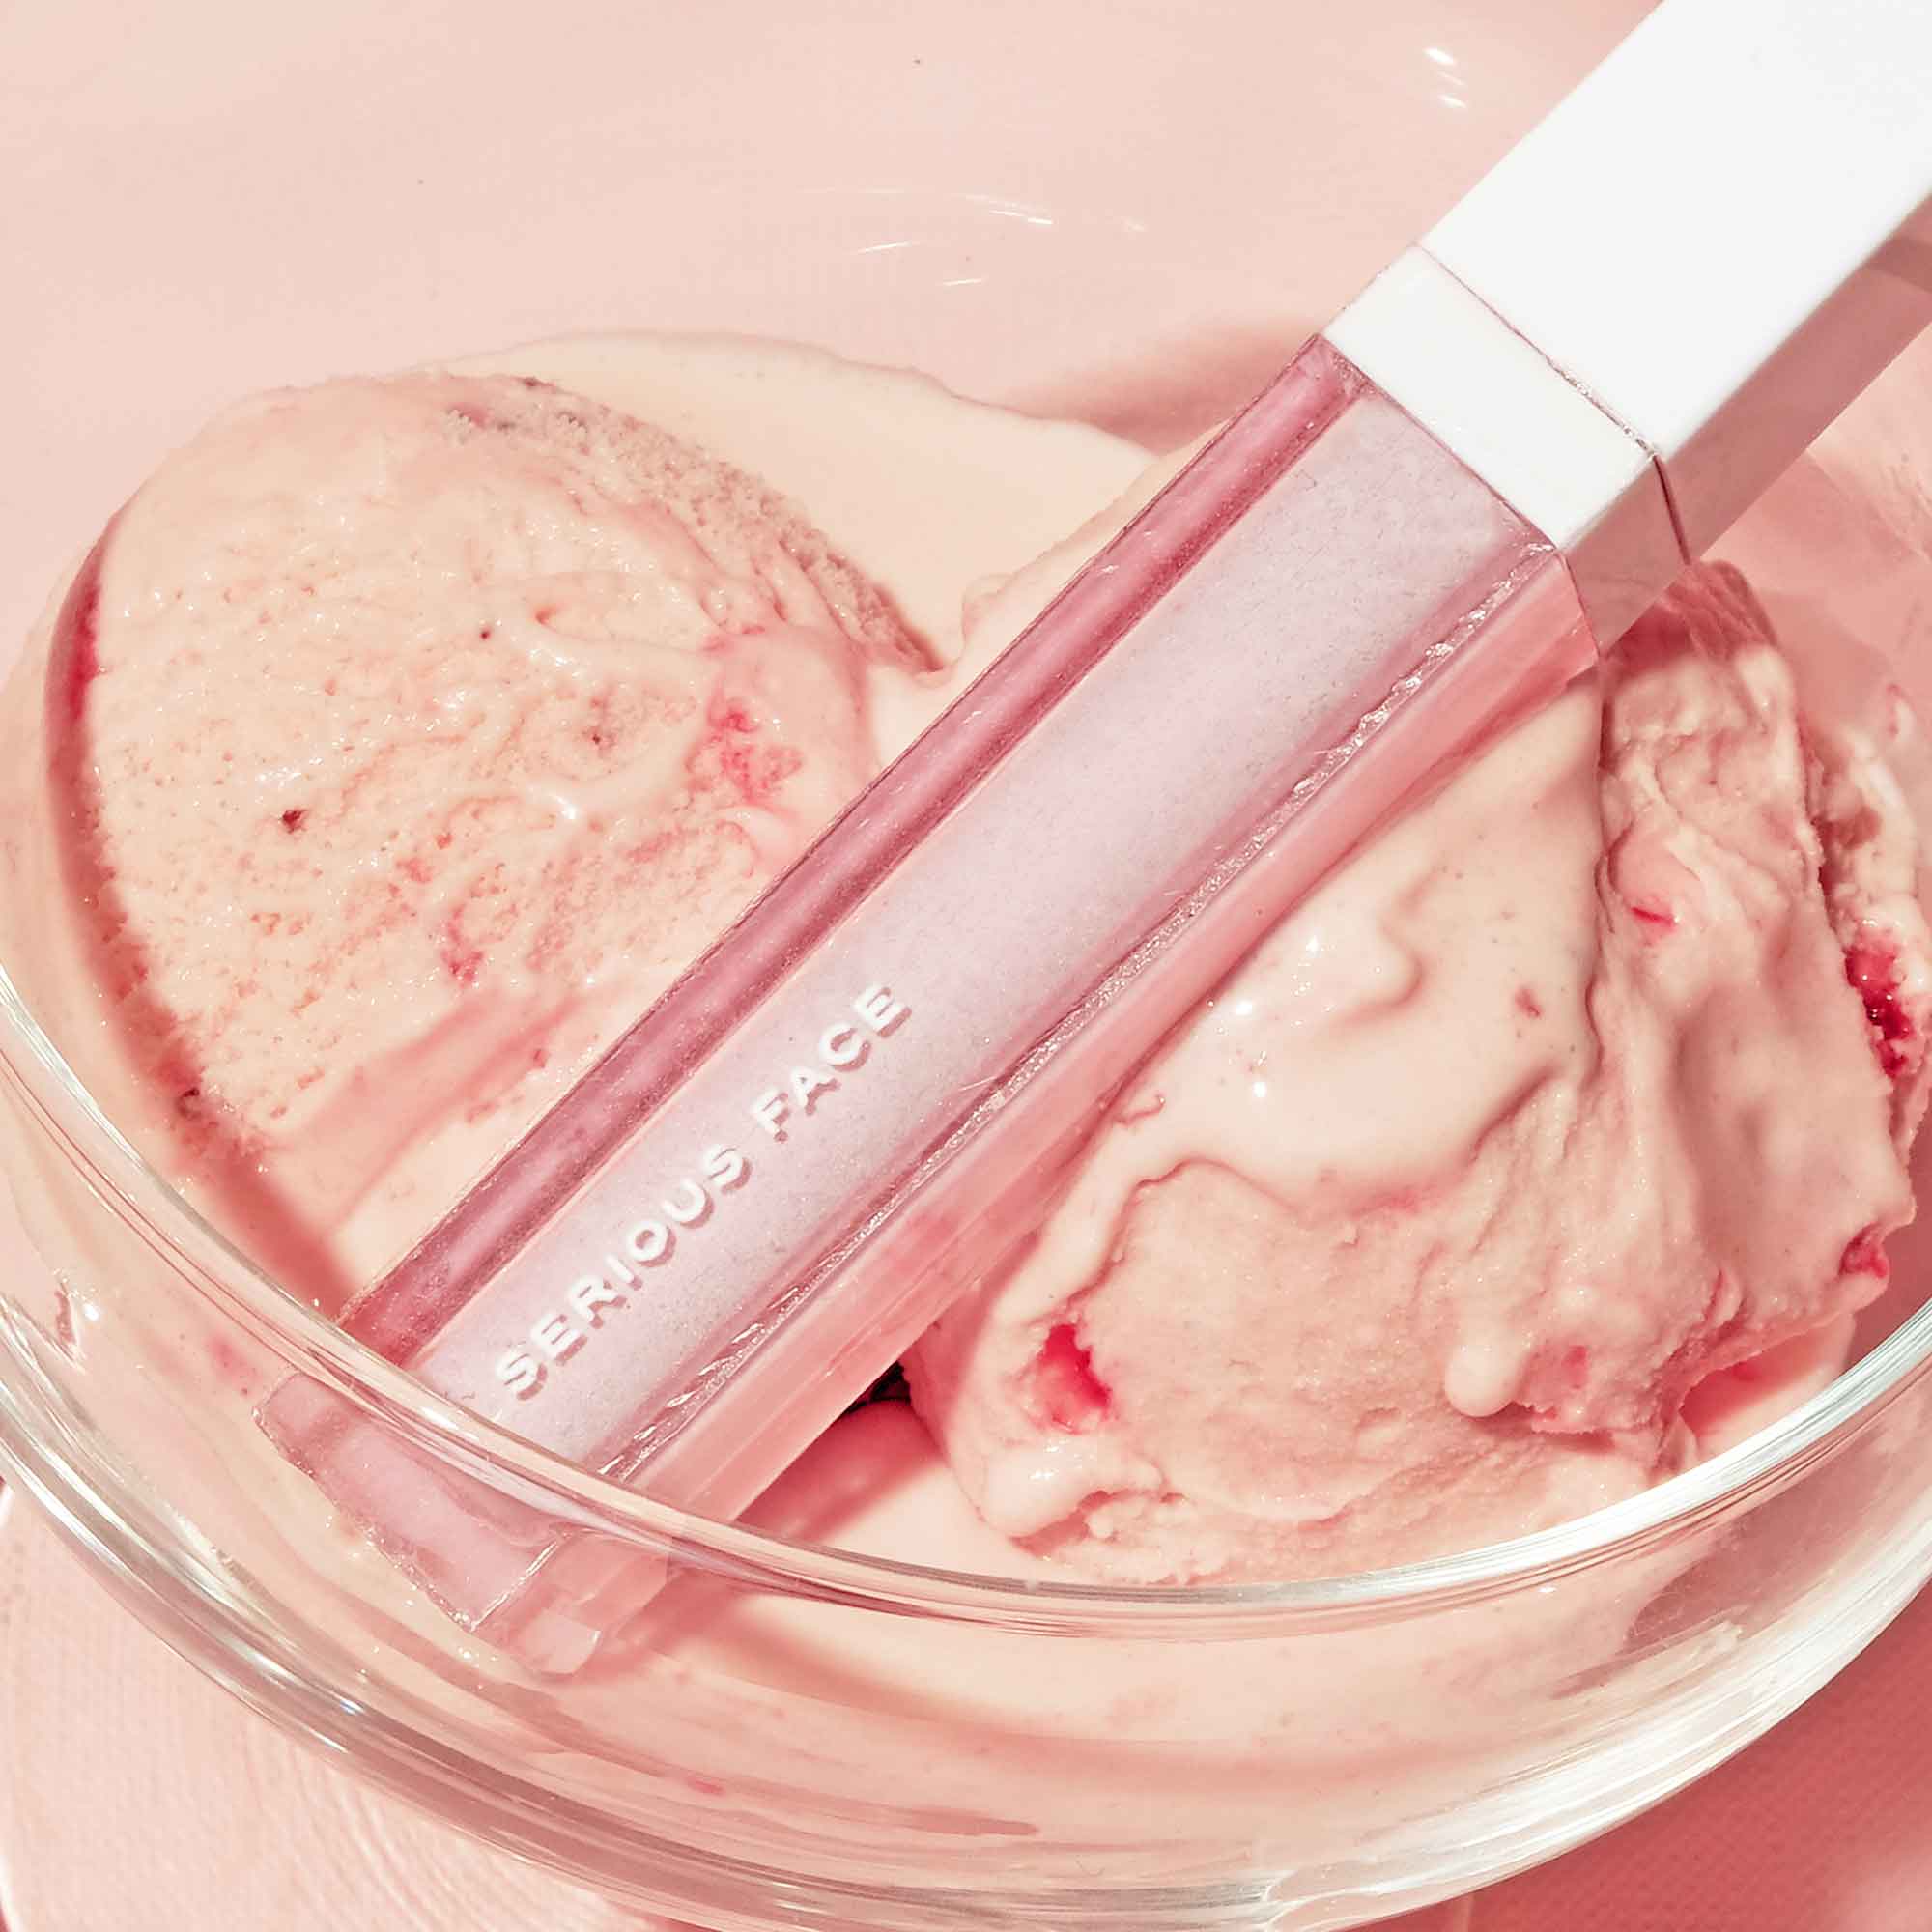 A photo of Serious Face's pink lipstick or beauty stick in a bowl of ice cream